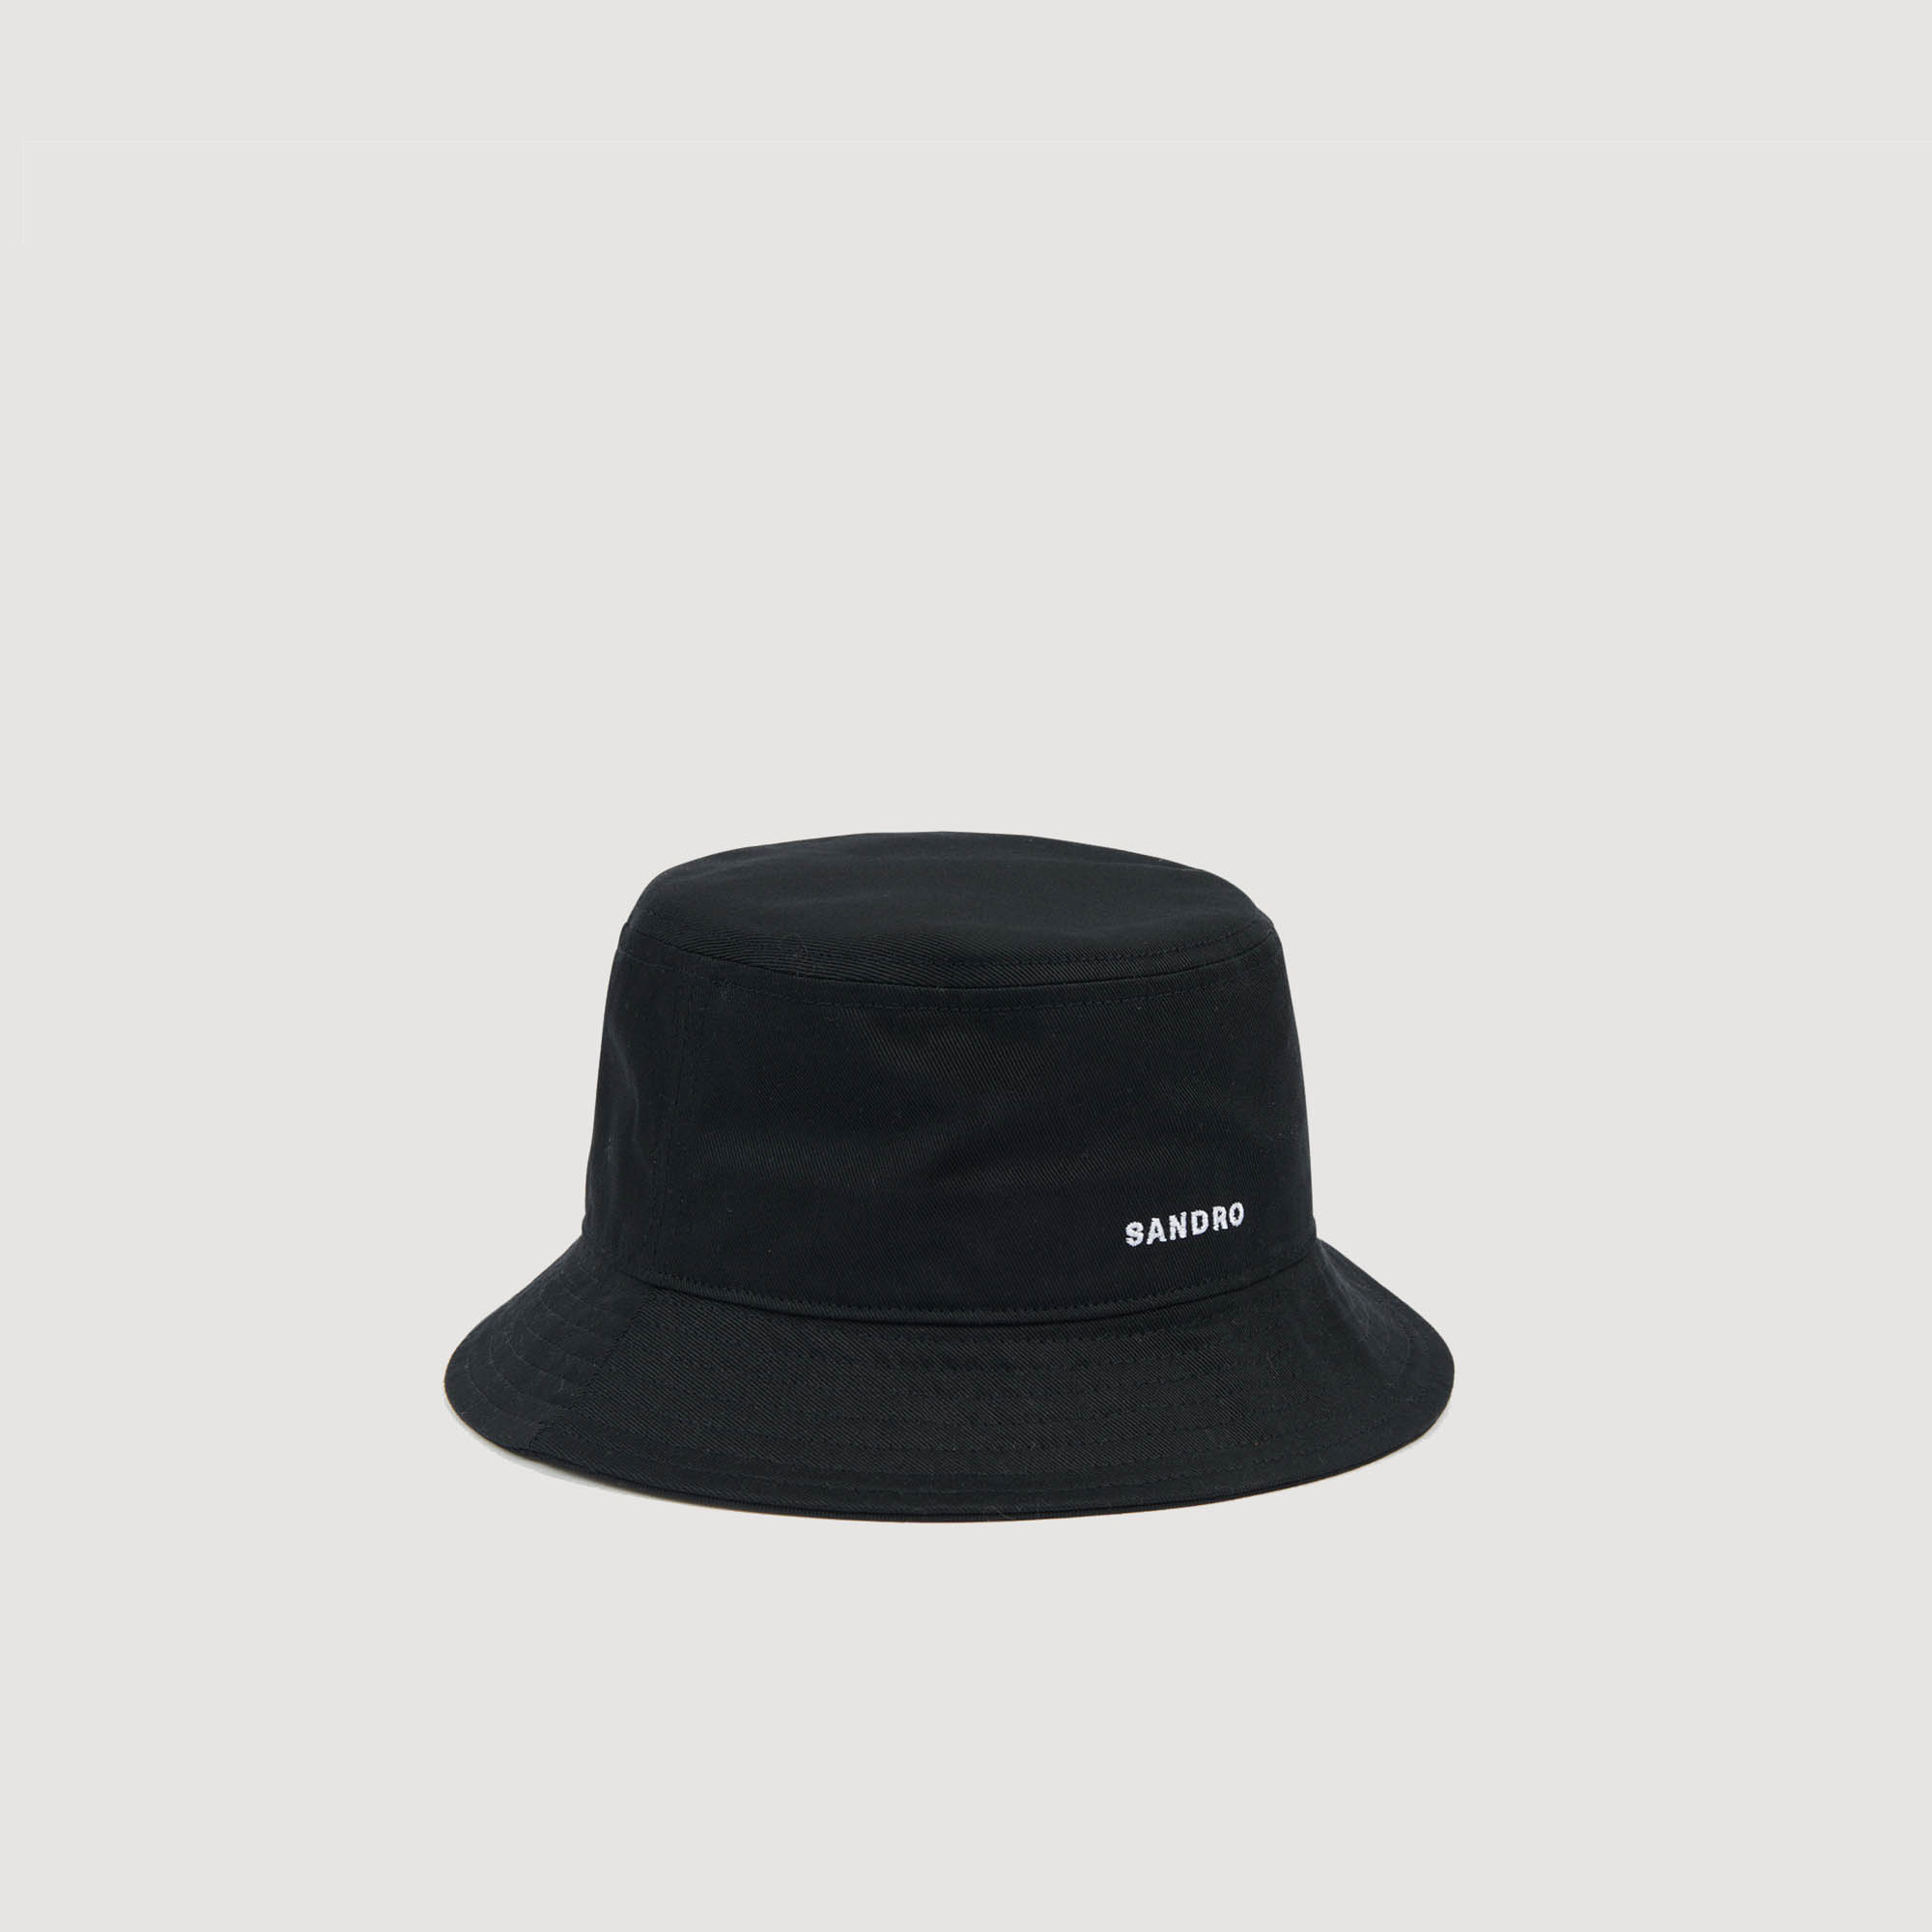 Sandro cotton Embroidered hat